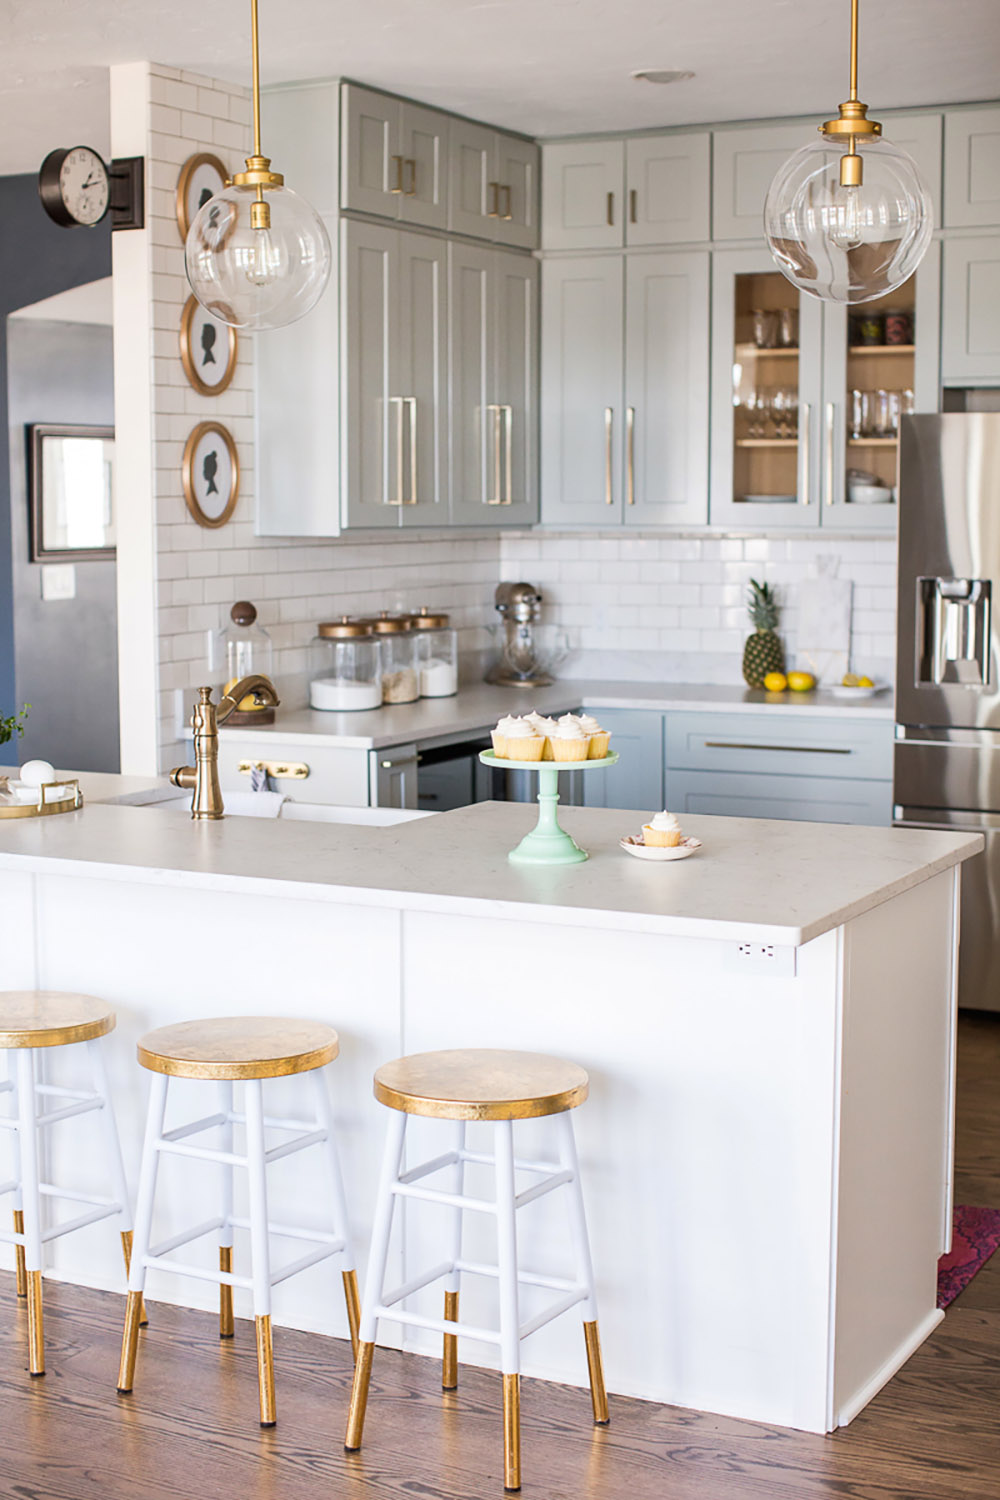 How to Completely Overhaul a Kitchen